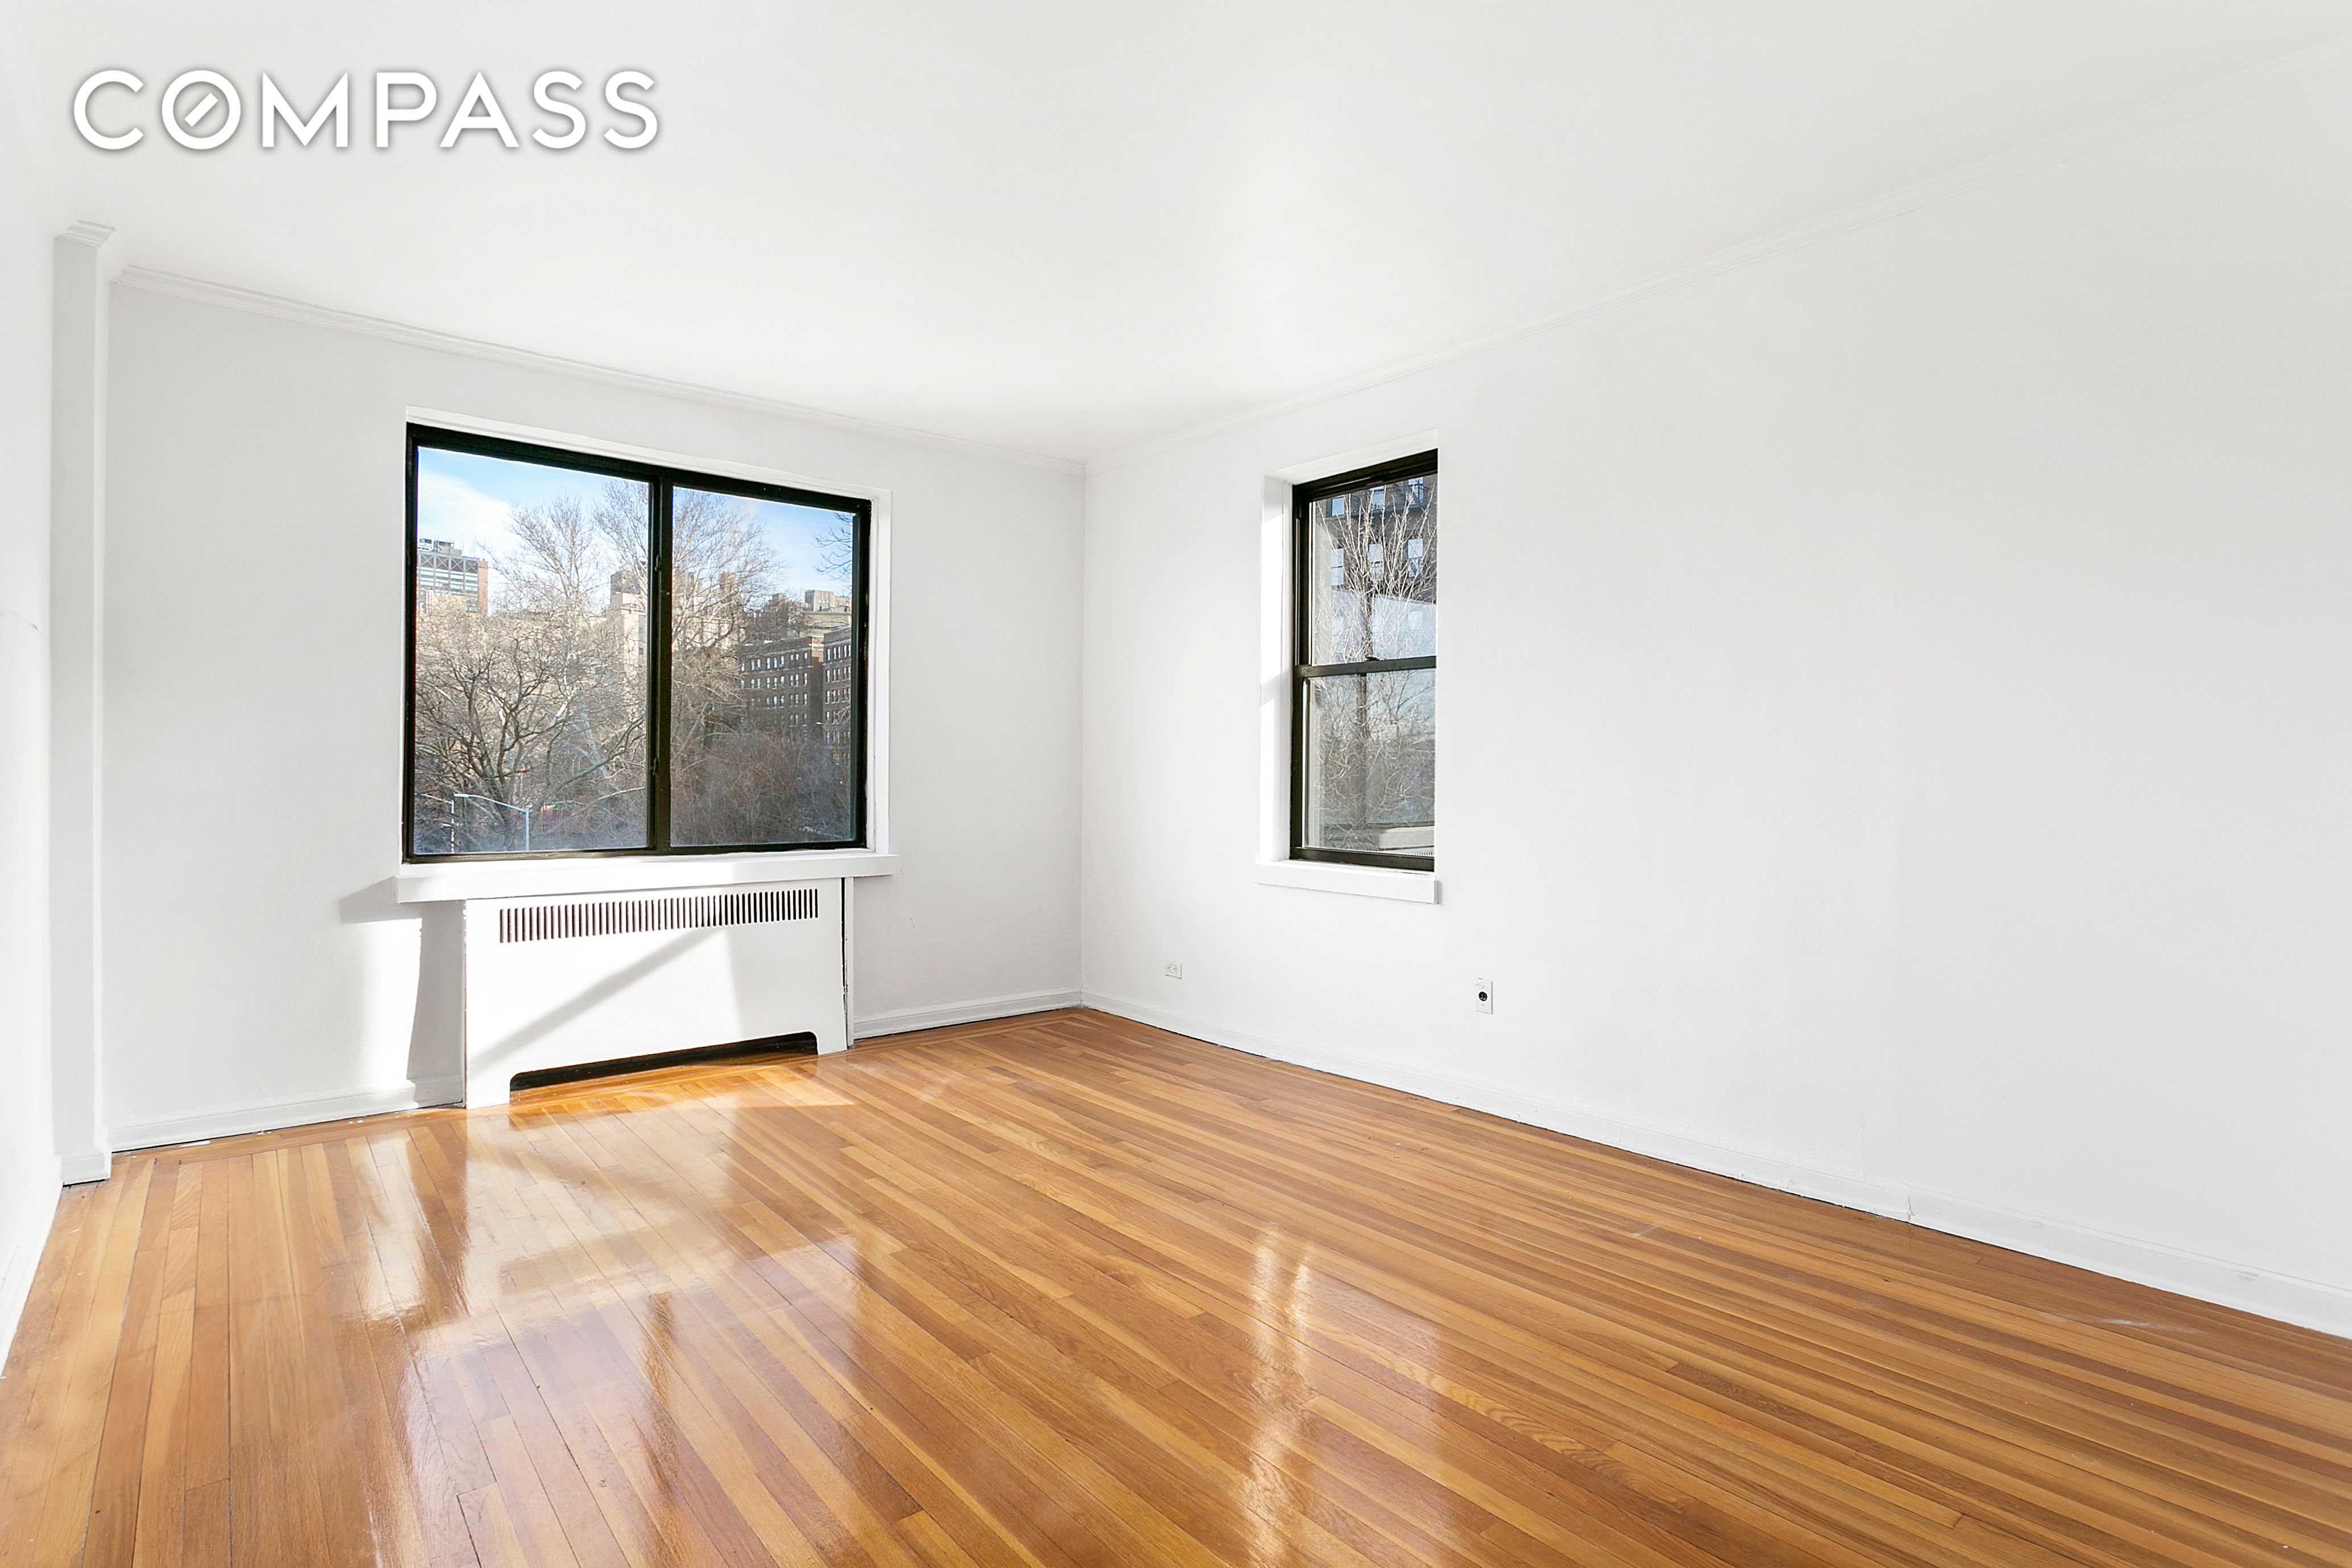 159-34 Riverside Drive West, New York City NY 10037 A.N Shell Realty